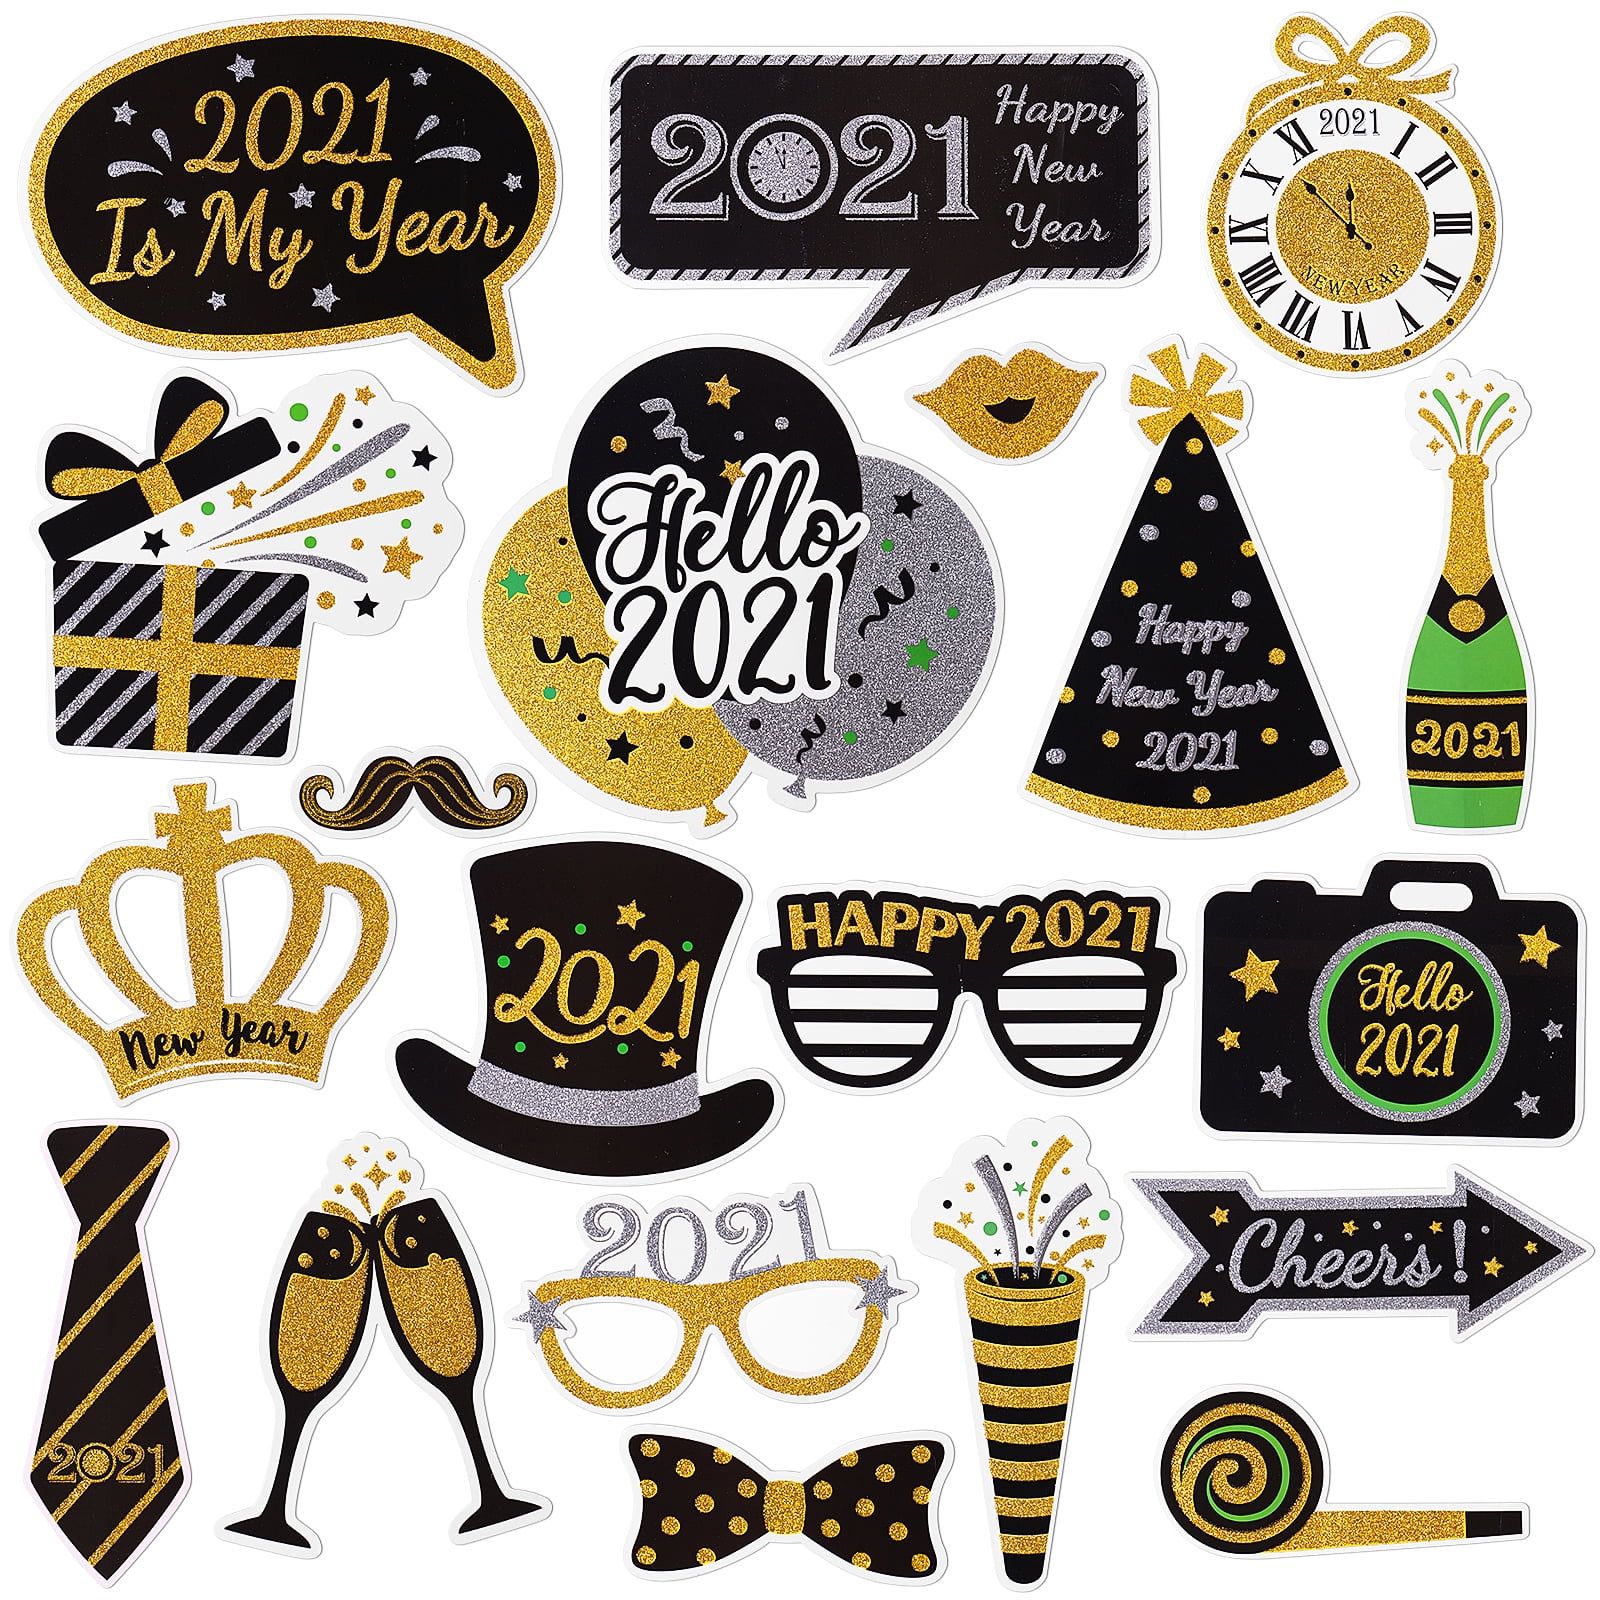 Happy New Year's Eve 2021 Photo Booth Party Props Selfie Fun Photography Decor 